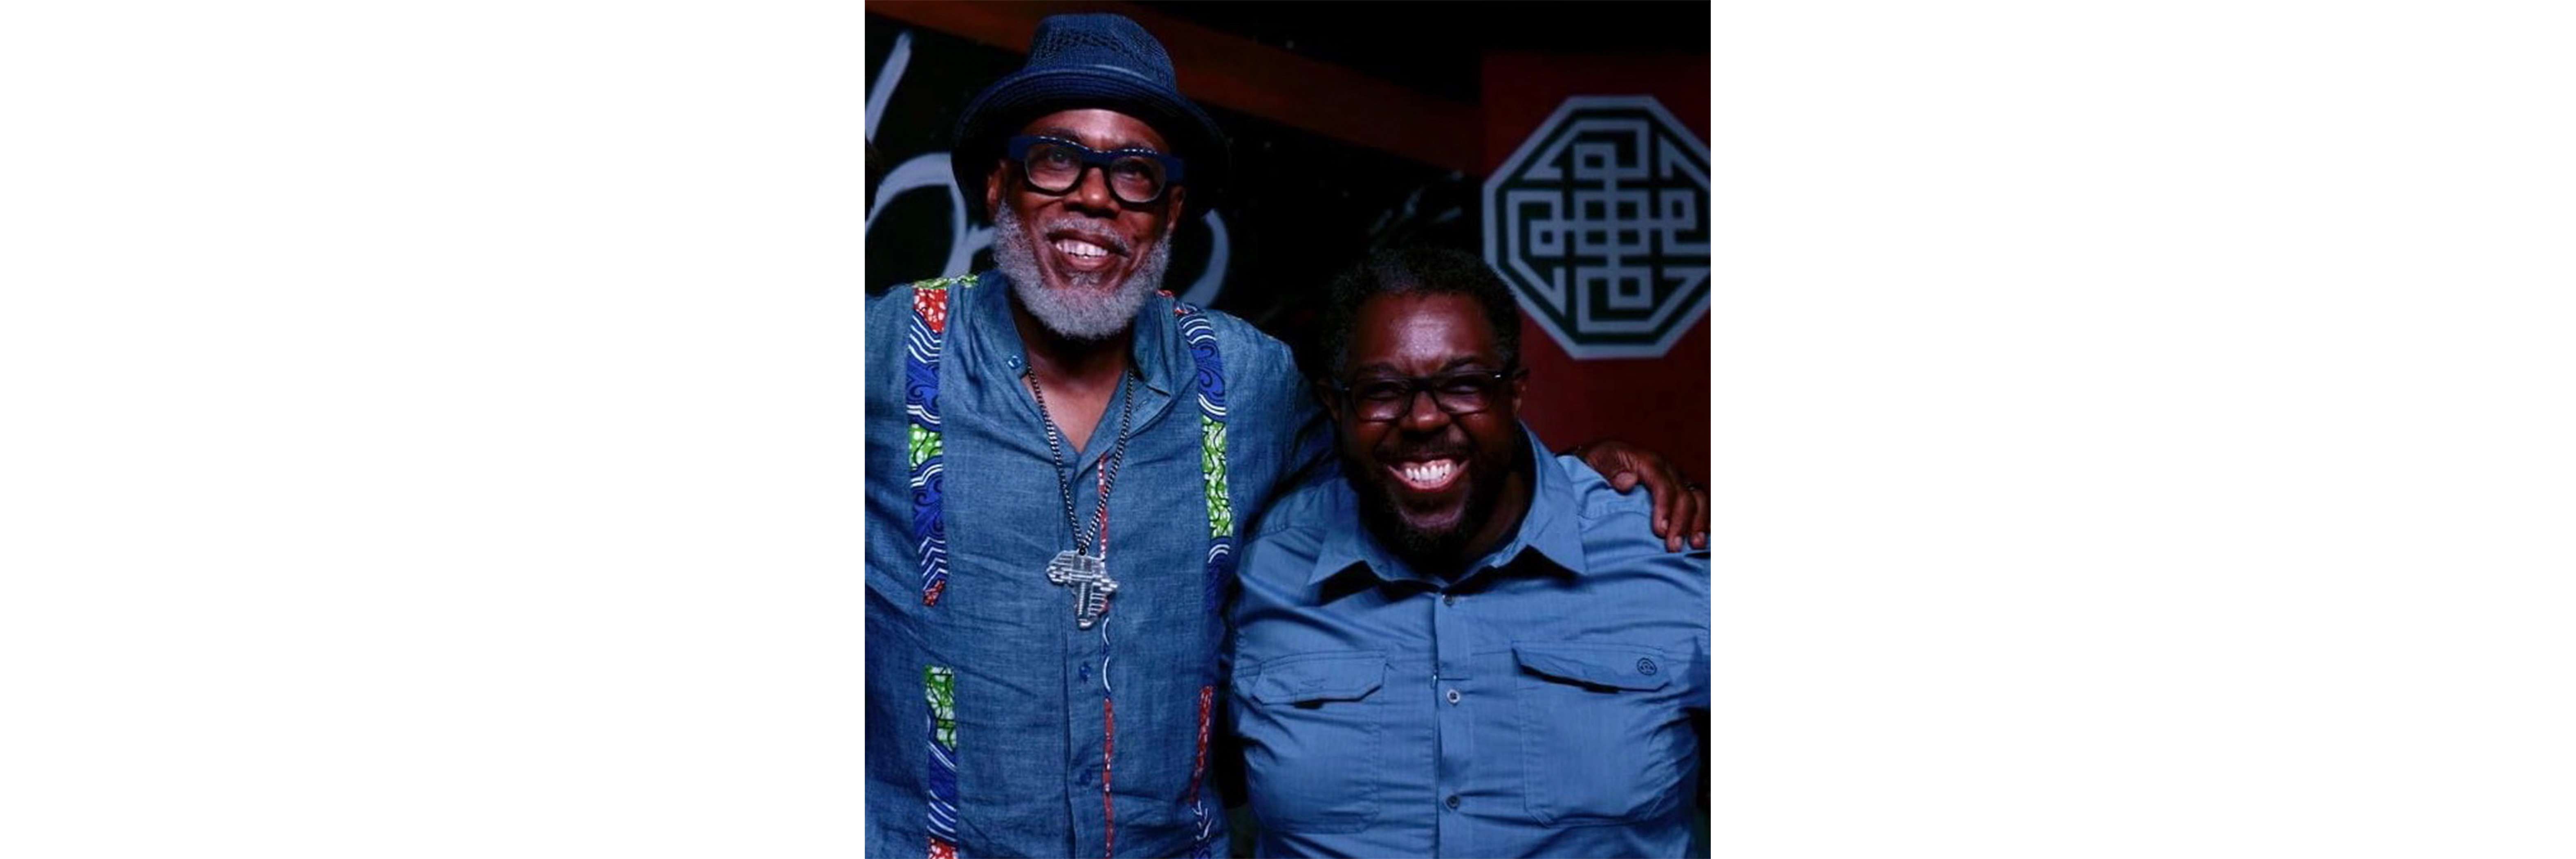 Photo of Jacques Lesure & Marvin “Smitty” Smith, courtesy of Jacques Lesure